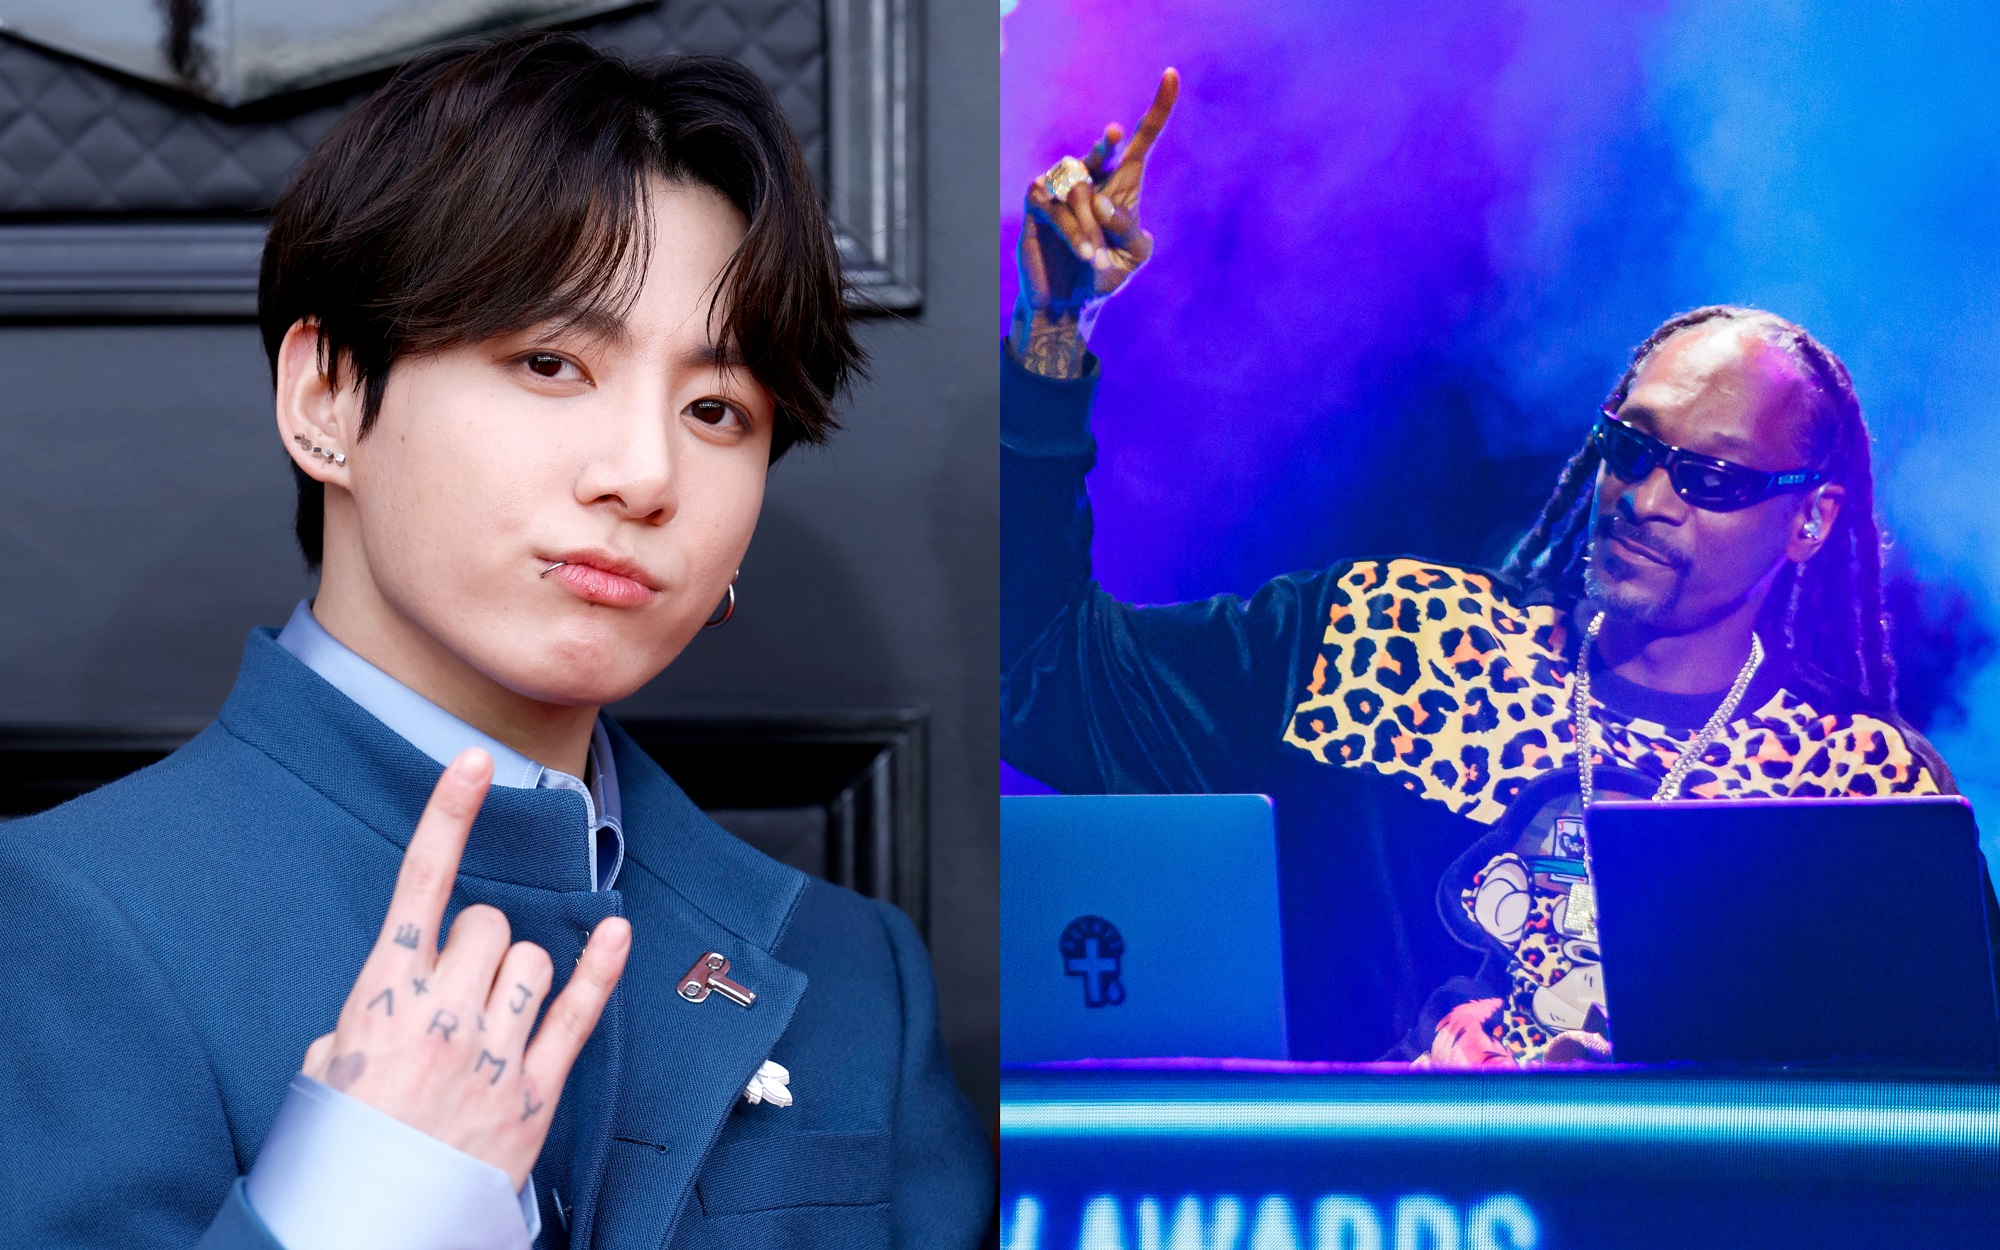 A joined photo of Jungkook of BTS and Snoop Dogg